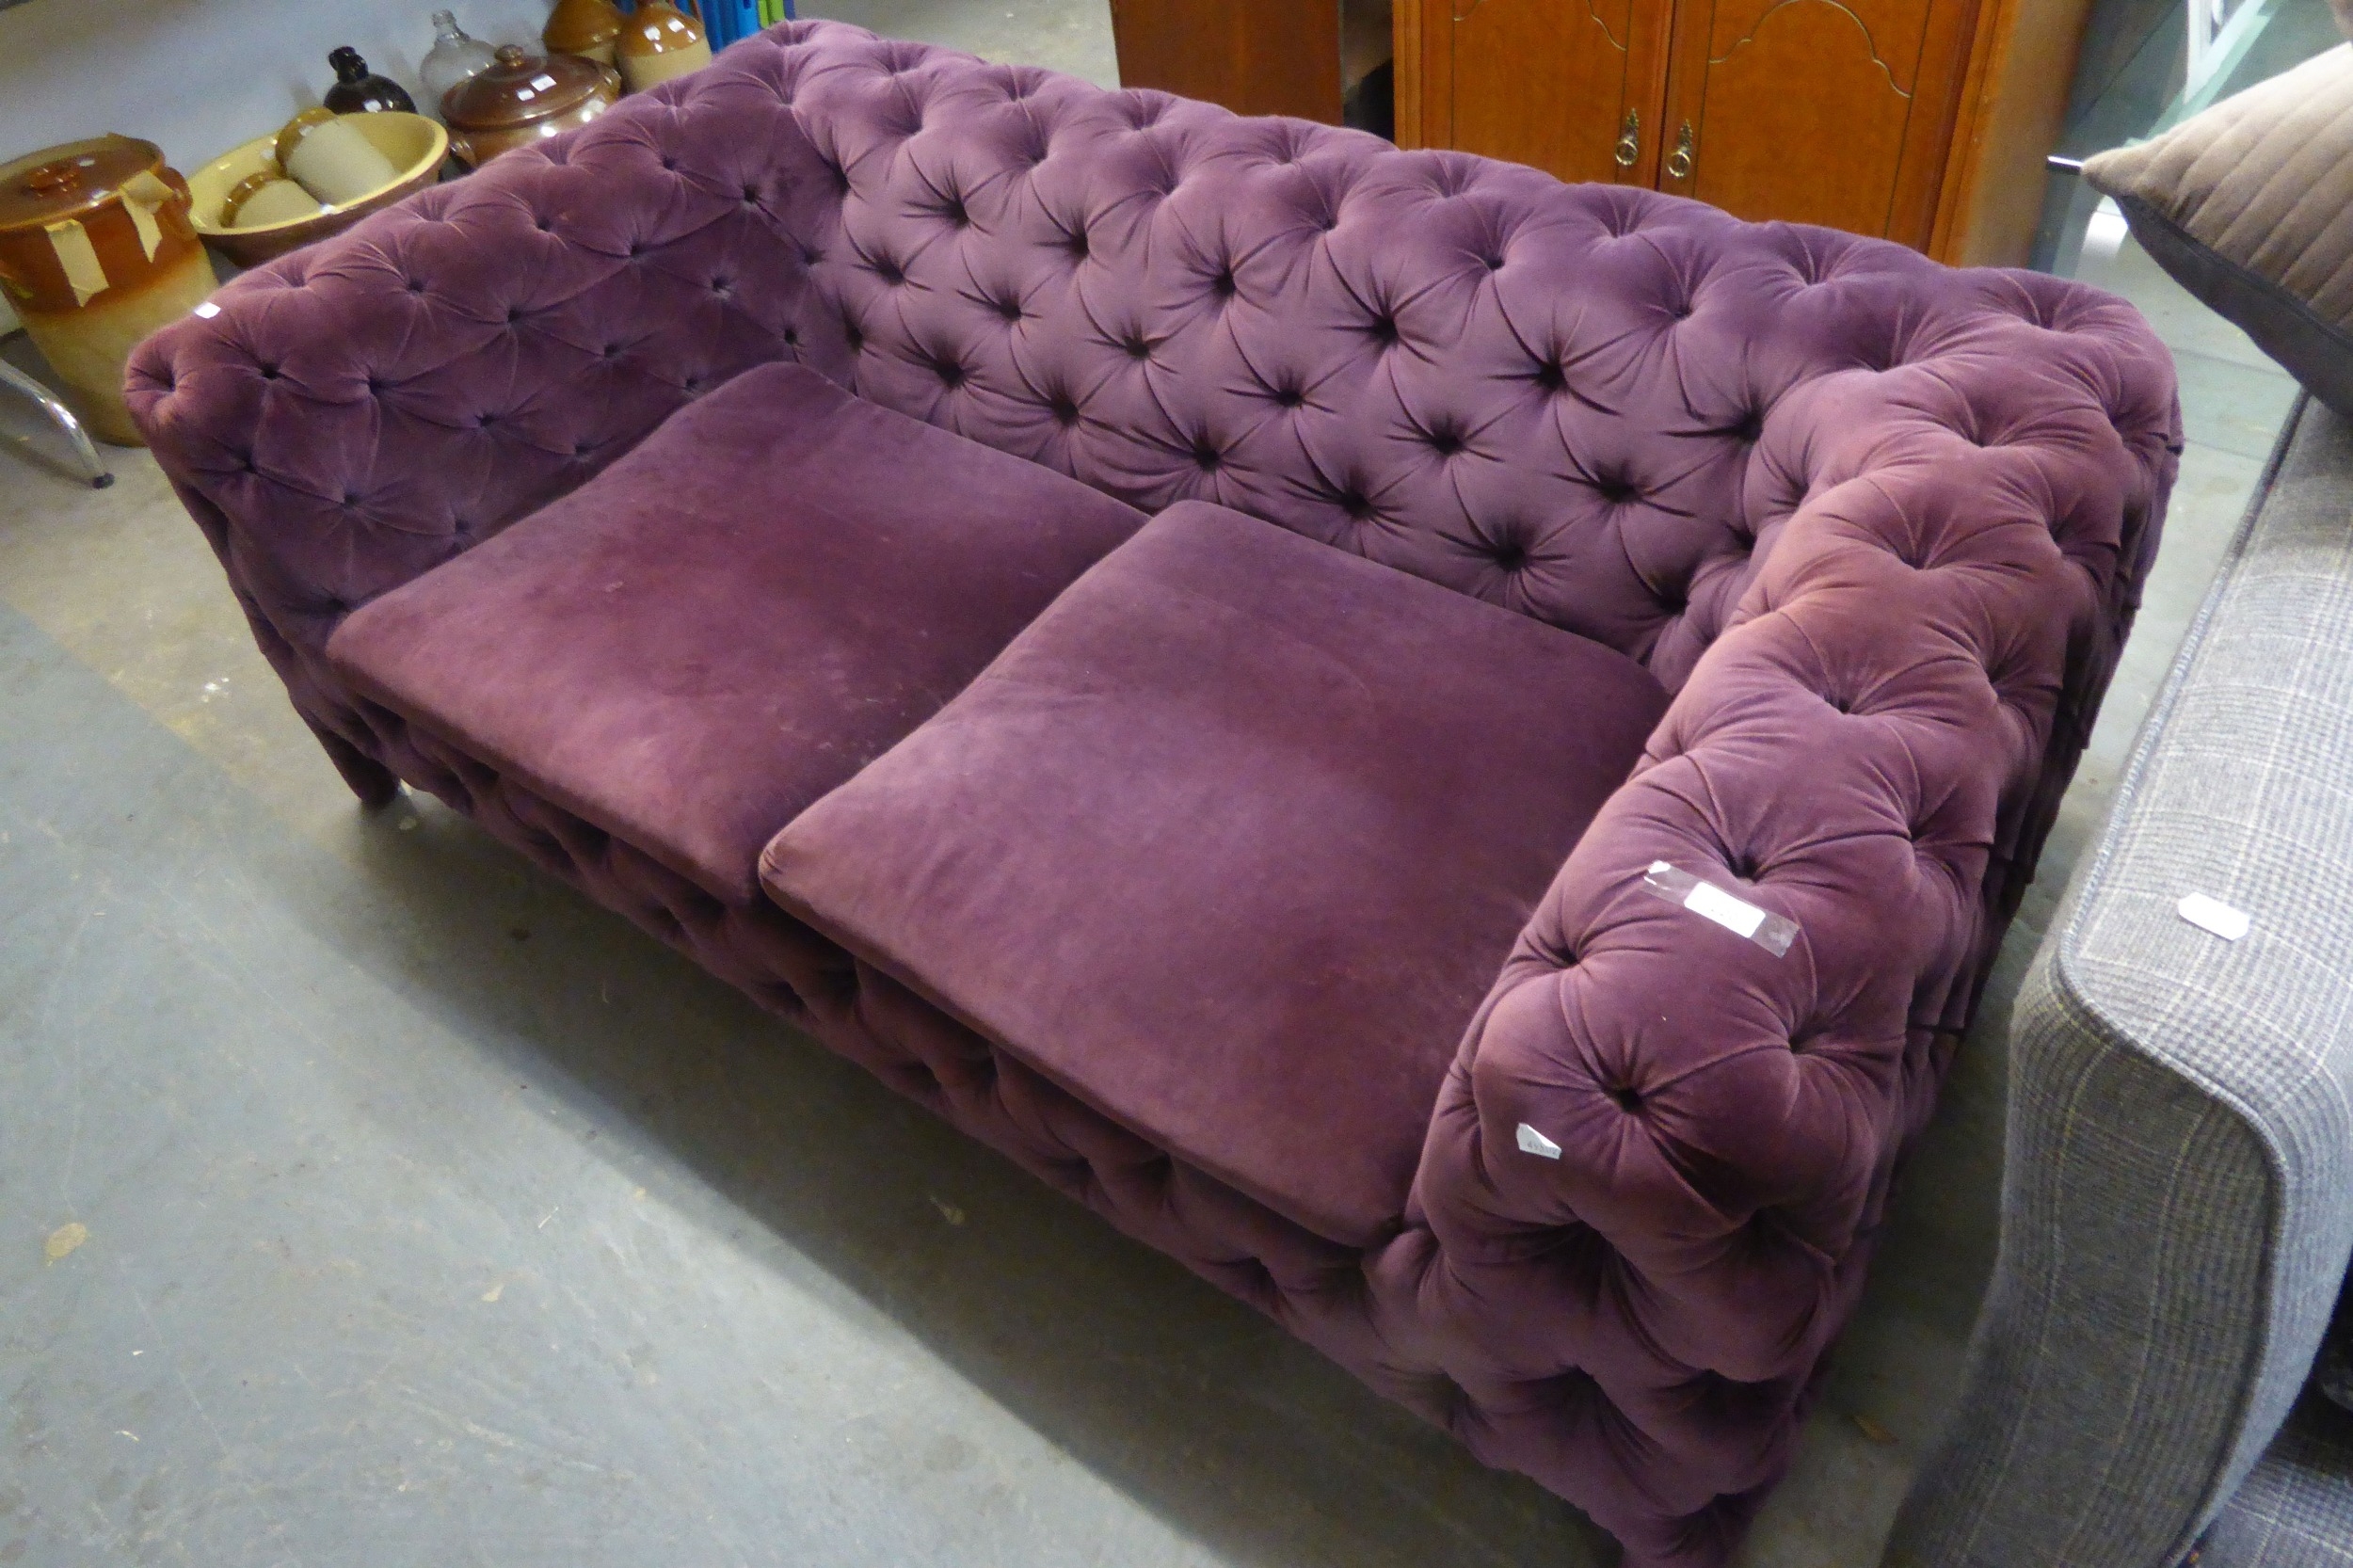 'ARKETIPO' CHESTERFIELD, BUTTON-BACK UPHOLSTERED TWO SEATER SETTEE IN PURPLE FABRIC